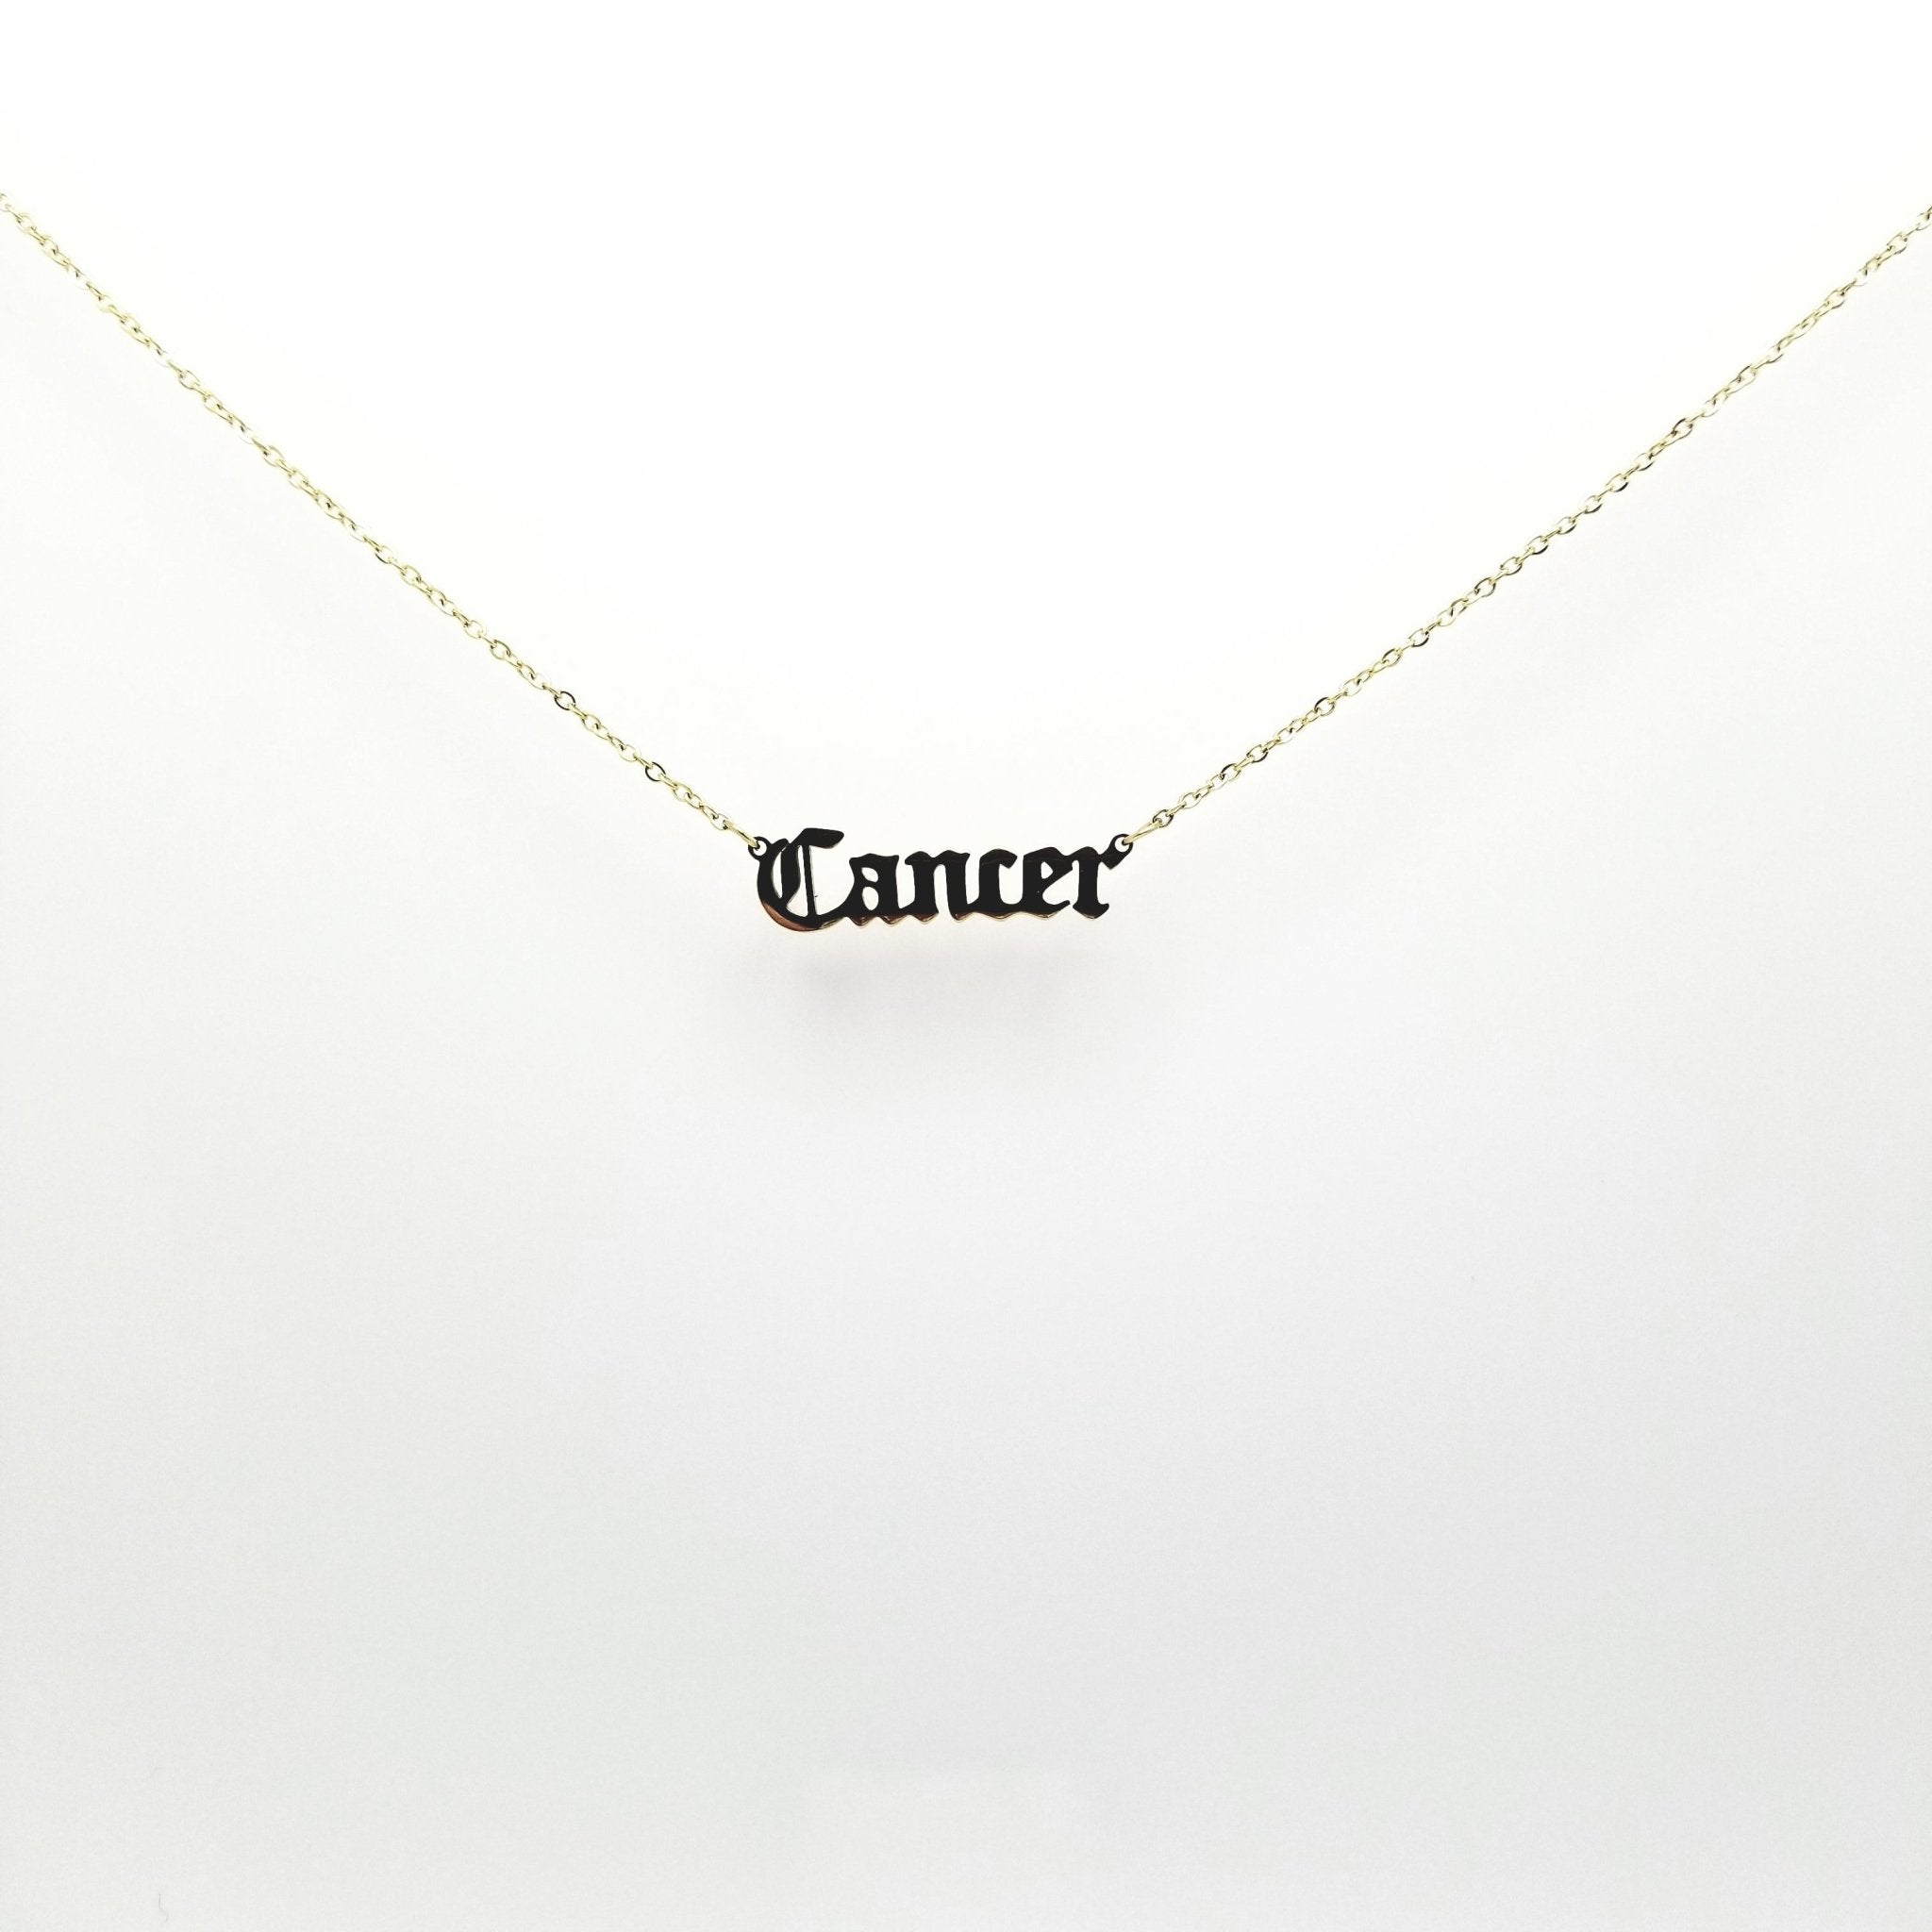 Cancer Zodiac Name Necklaces| 18k Gold Plated - Spiral Circle